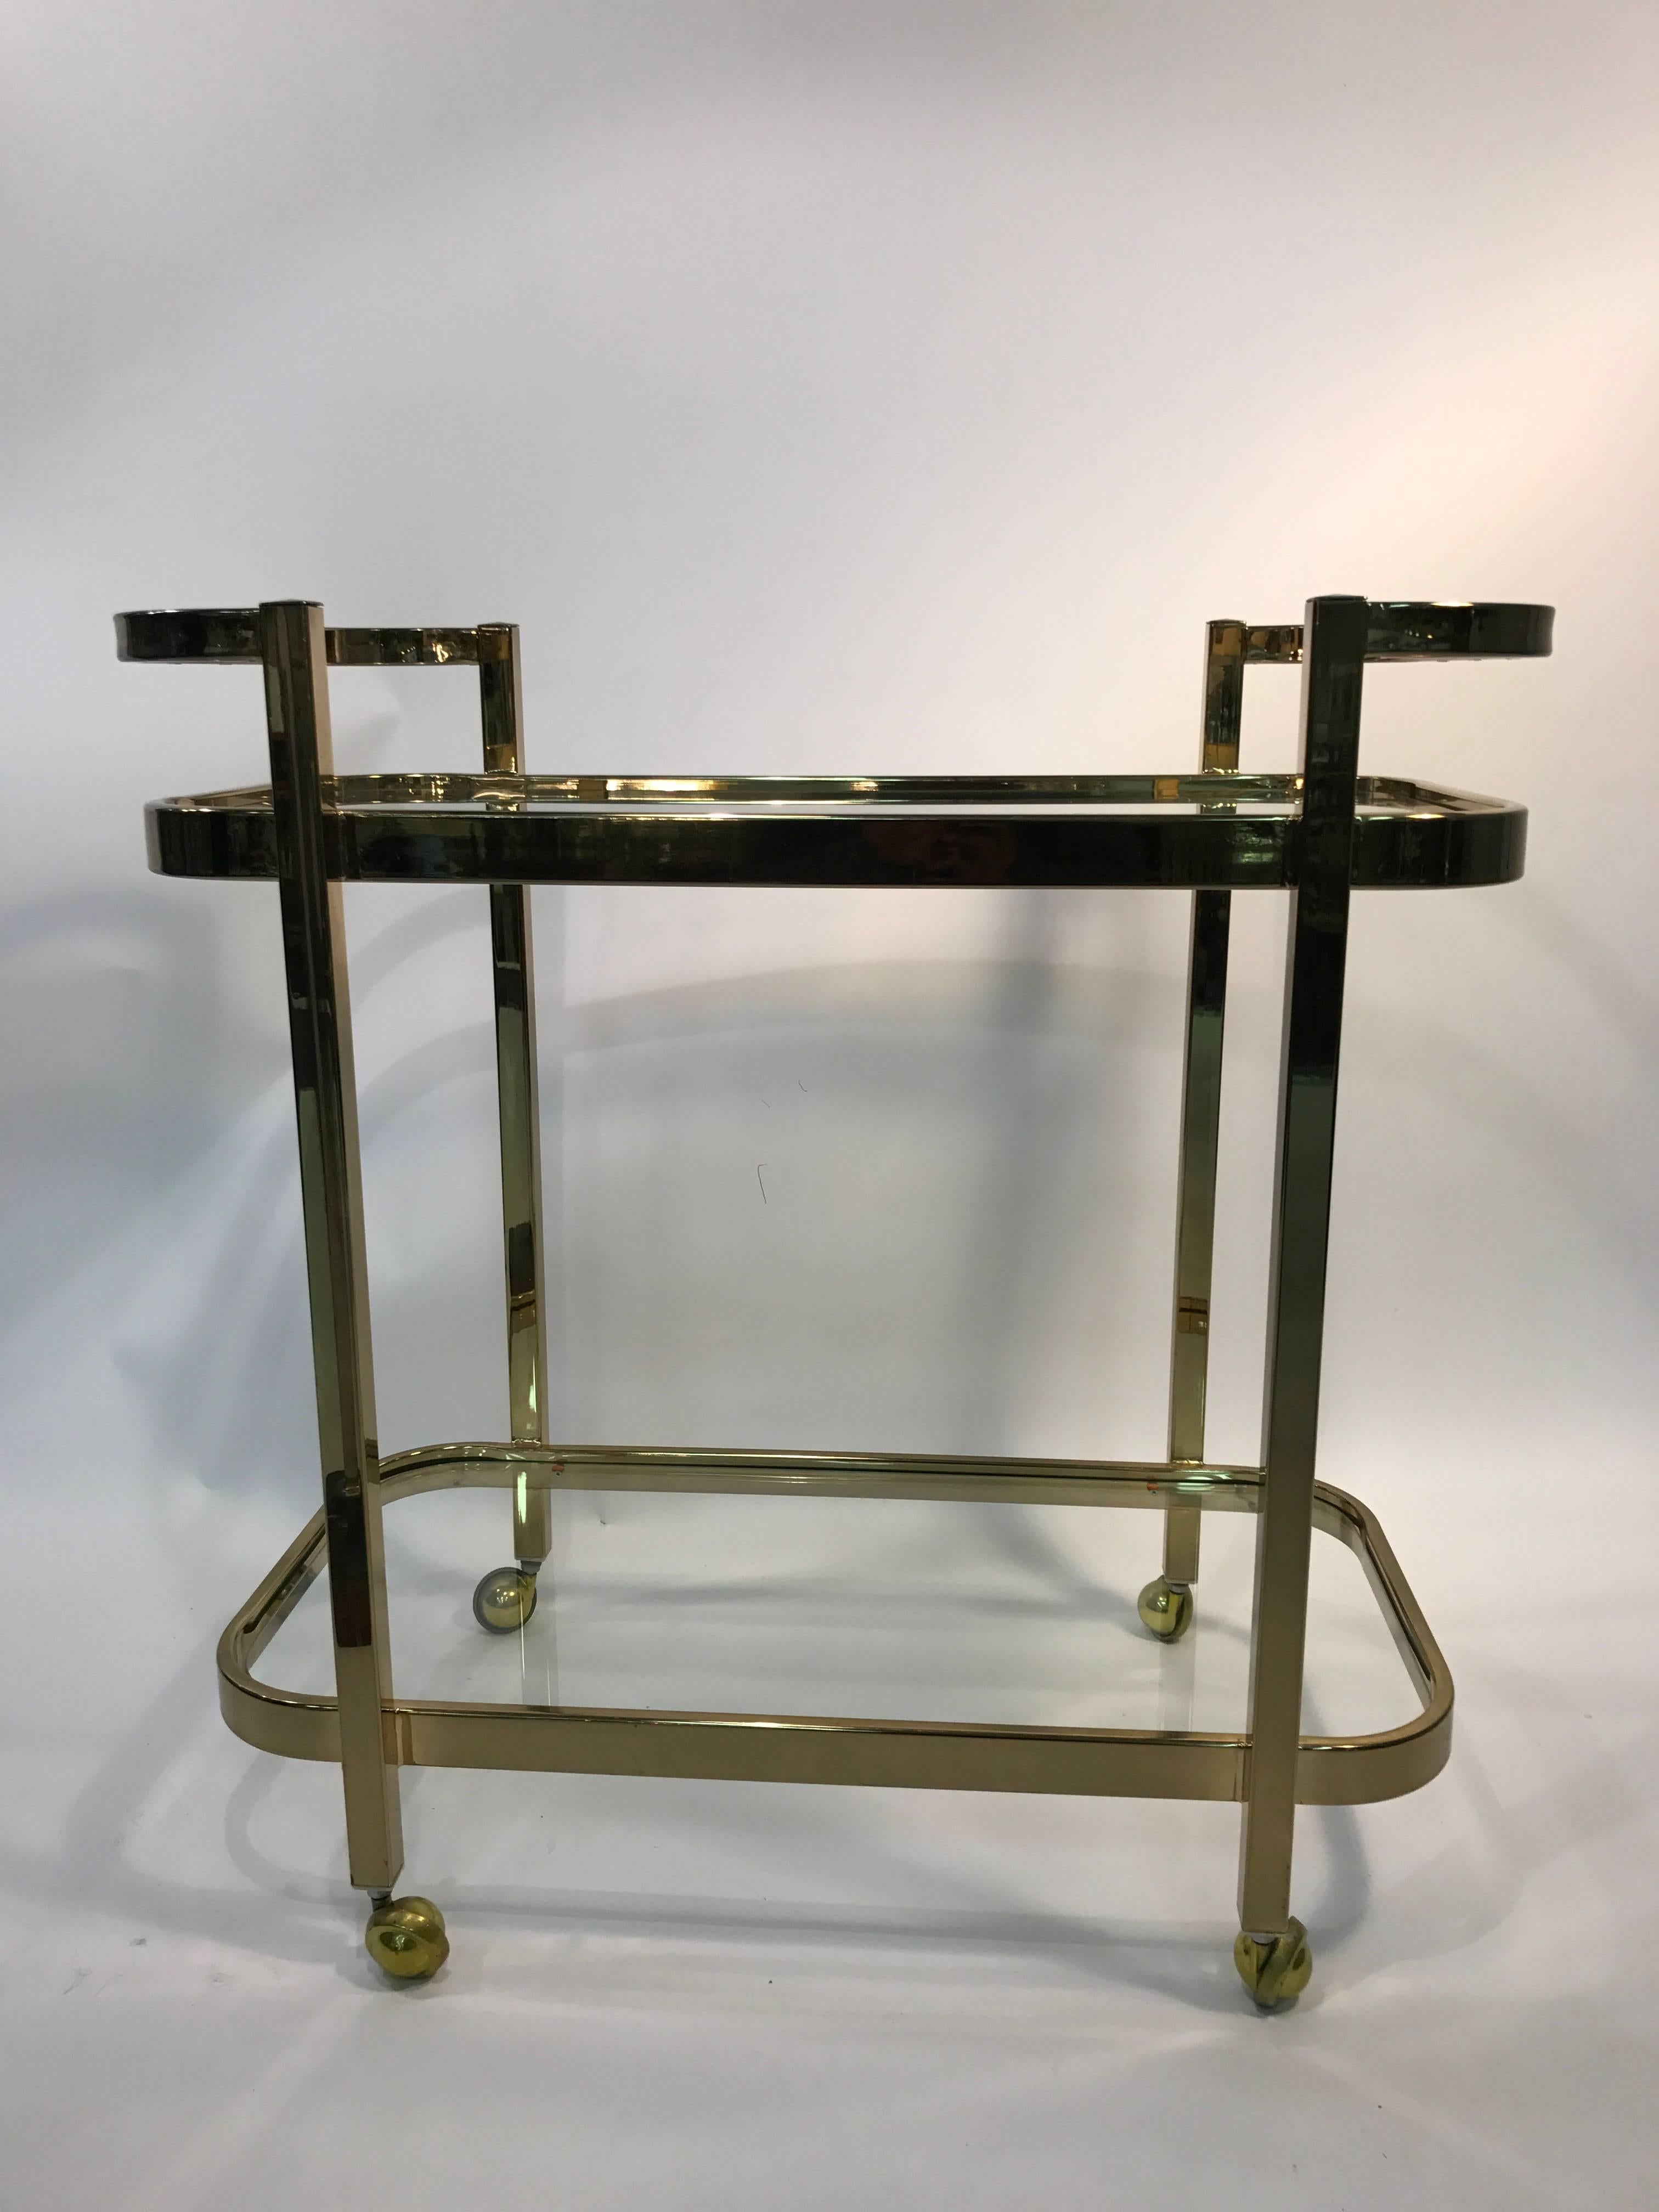 A beautiful two-tier brass and glass bar cart by Milo Baughman, circa 1970. Good vintage condition with age appropriate wear.